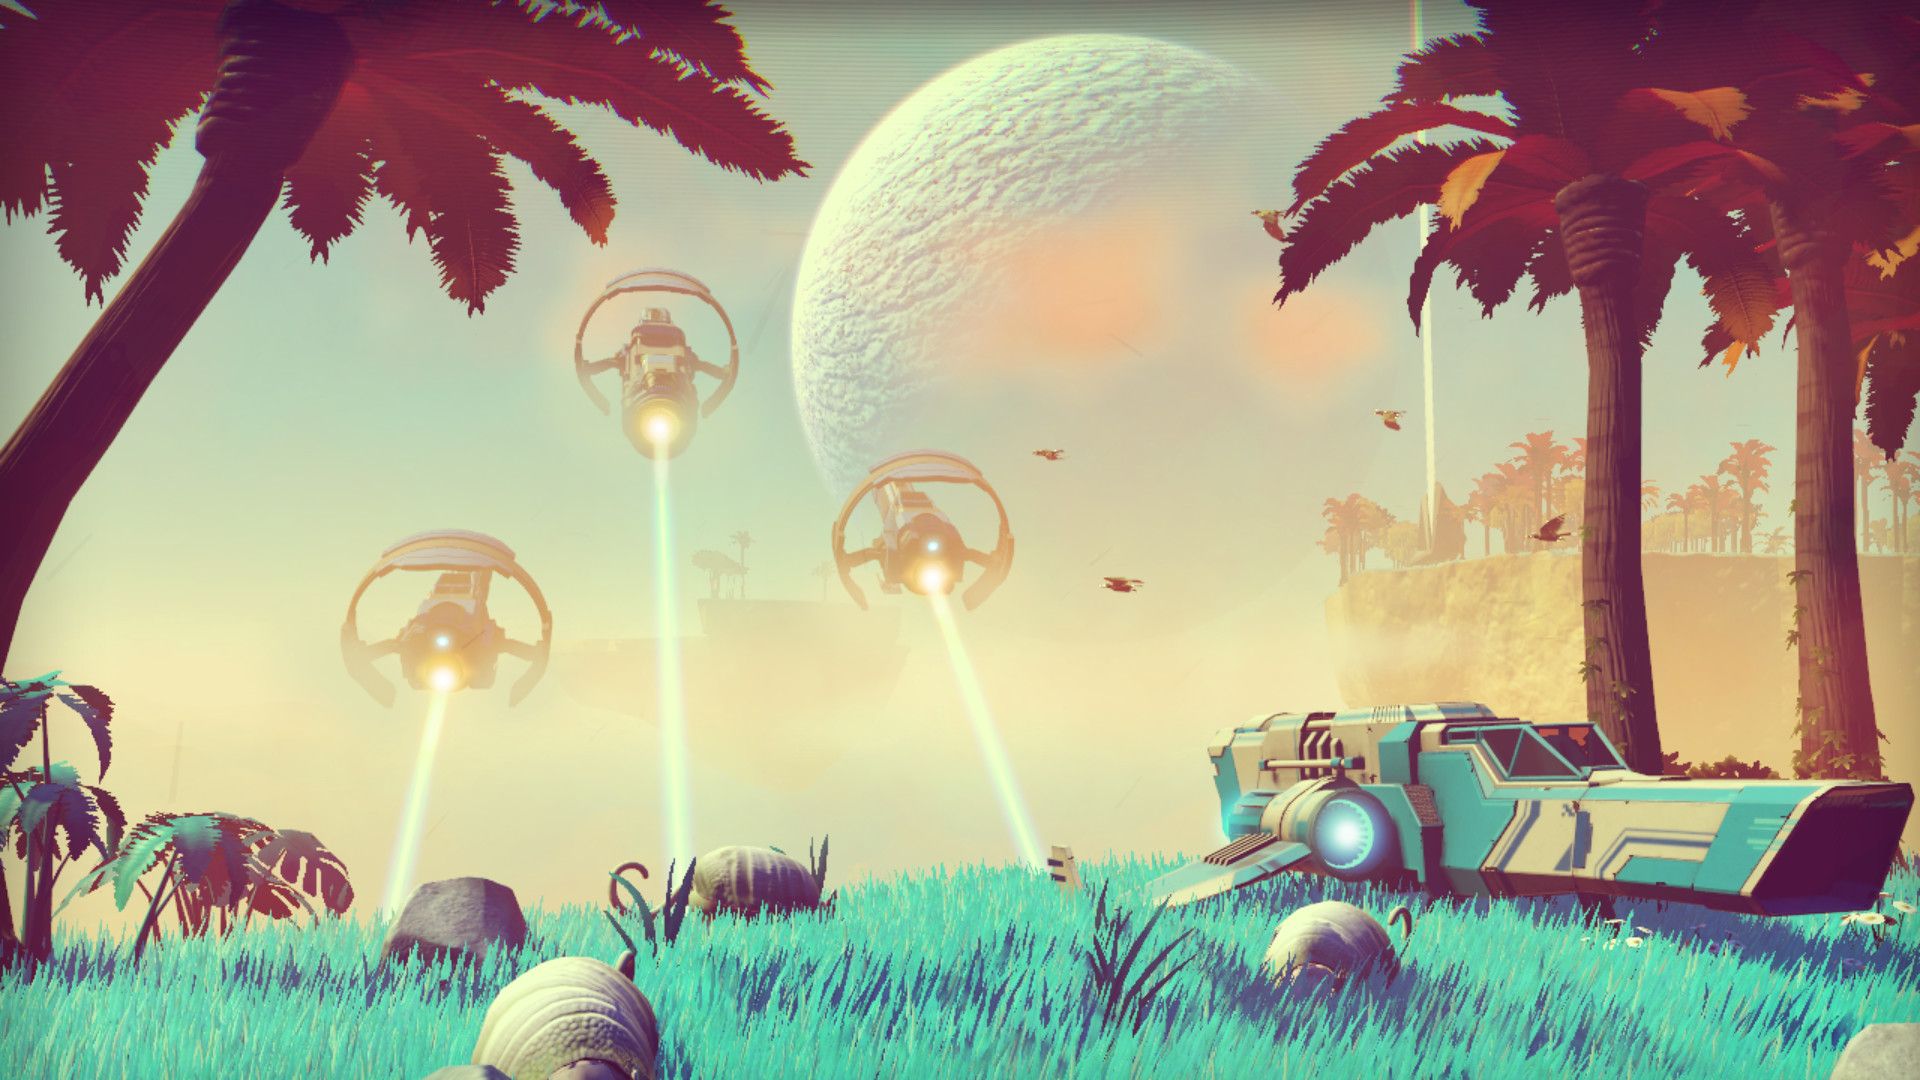 “No Man’s Sky” Delayed to August - Game Needs More Polish